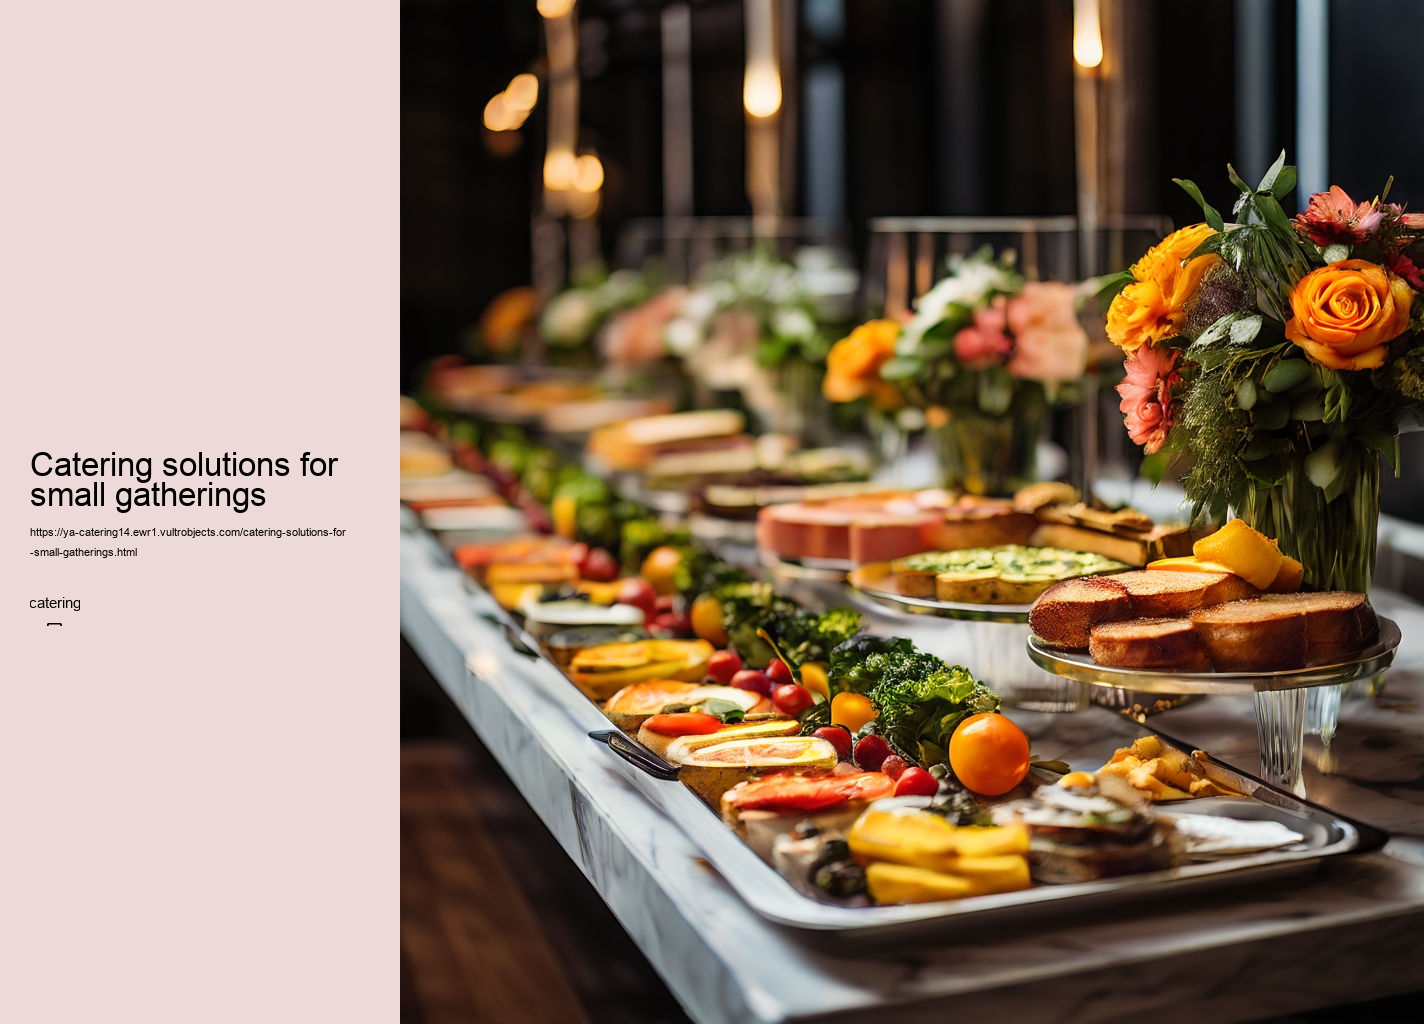 Catering solutions for small gatherings